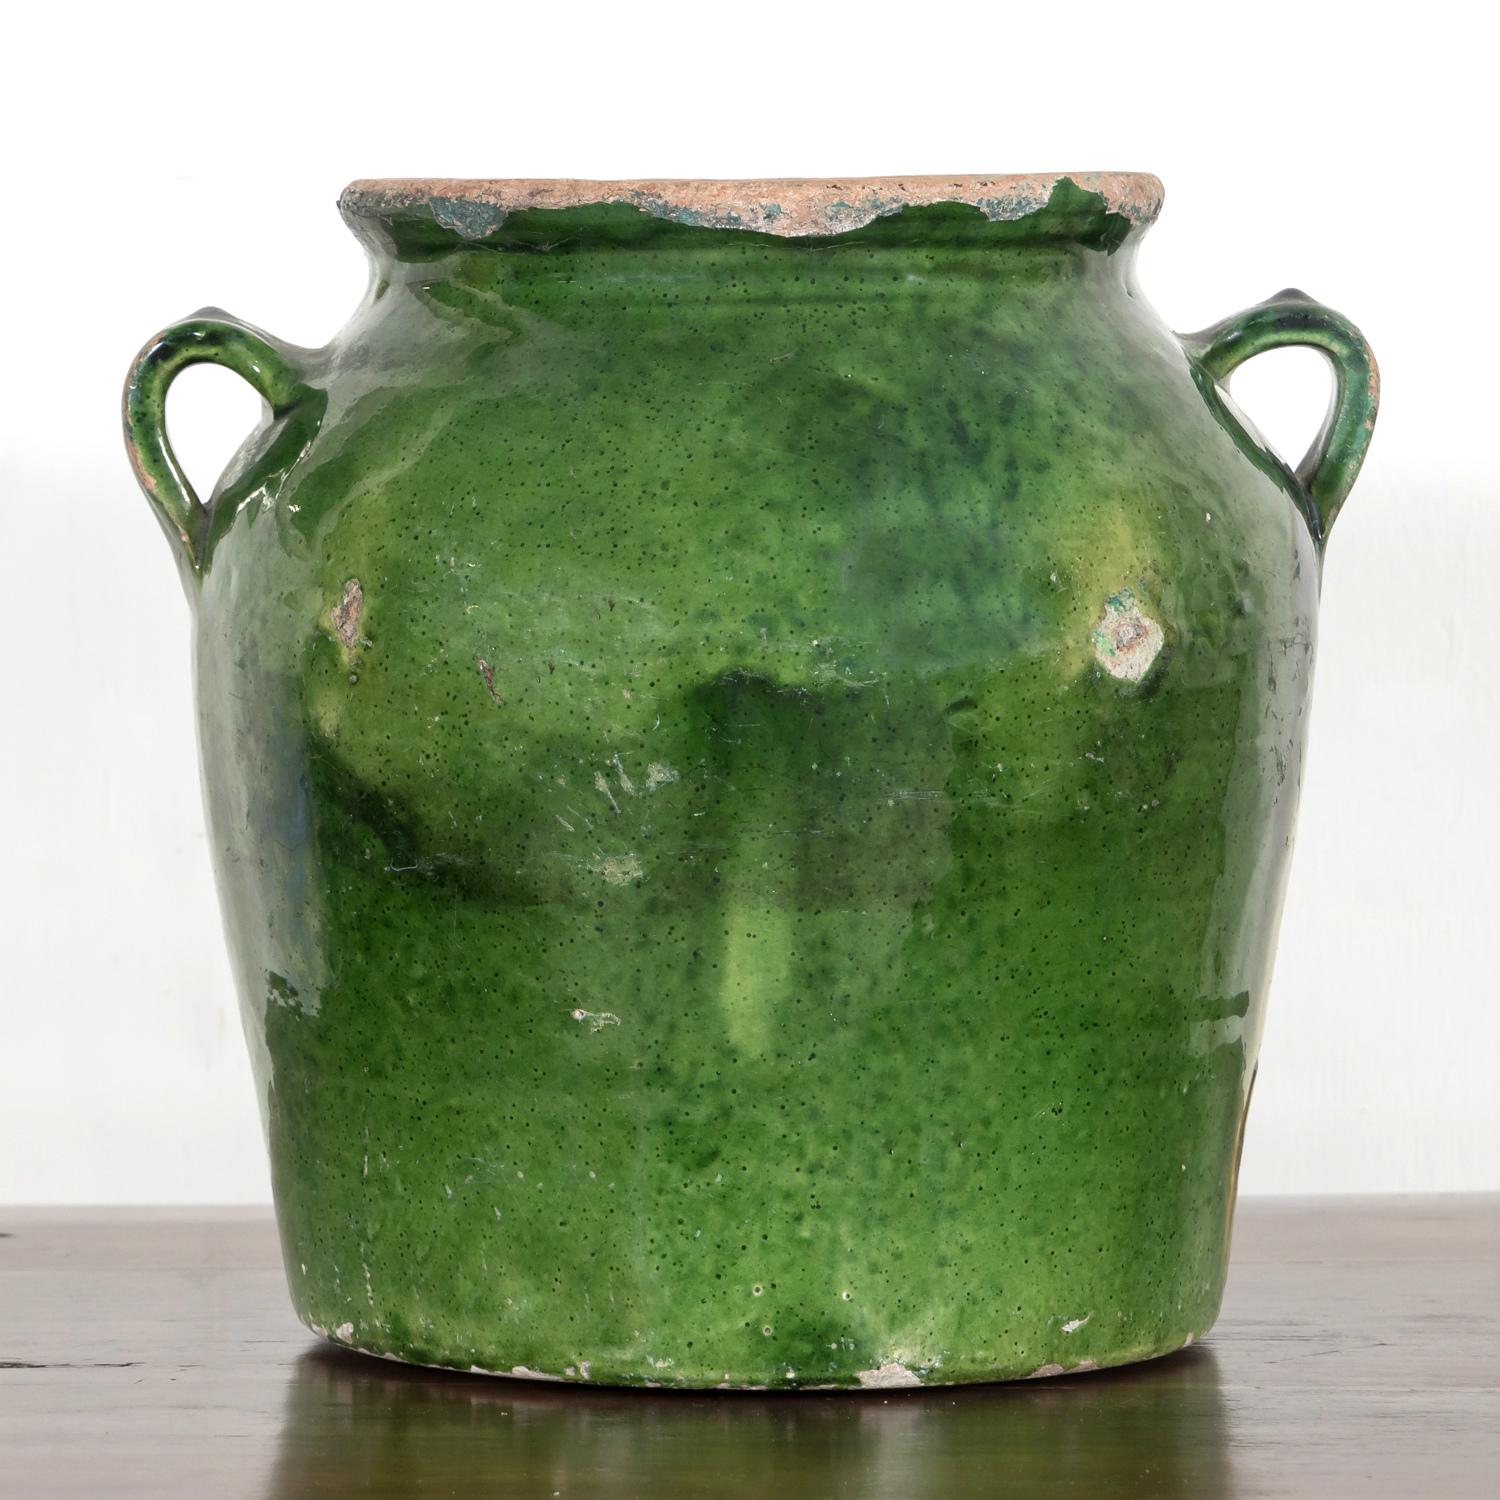 A stunning 19th century French pot de confit or confit pot from southwest France having two handles and a rare dark green glaze on the outside with a yellow glaze inside the pot, circa 1880s. Utilitarian earthenware vessels like this one were a